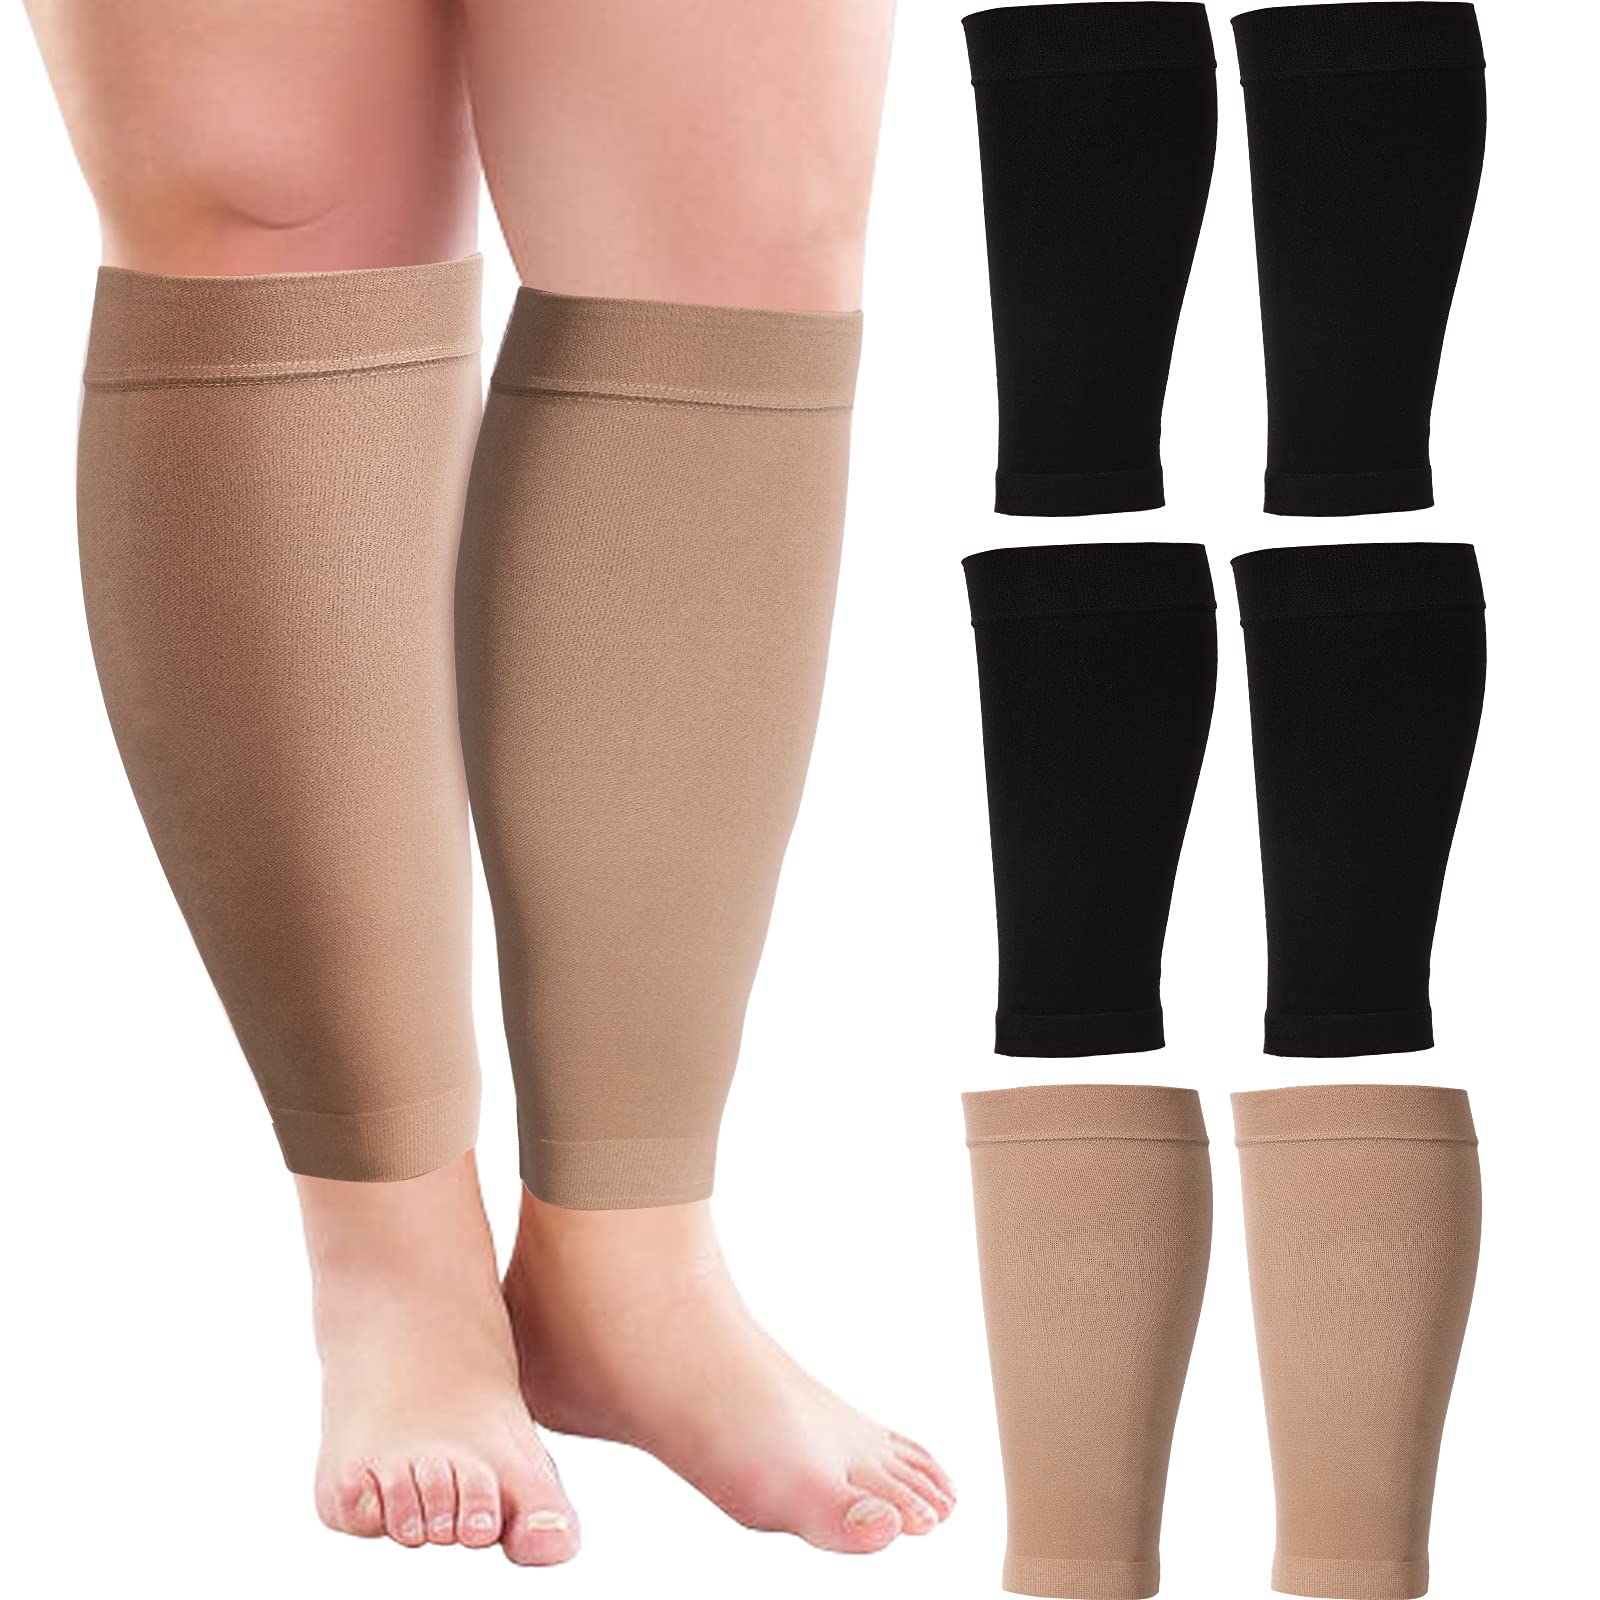 Compression Socks For Women Men,Plus Size Compression Socks Men Women,Wide  Calf Compression Stockings Support Socks,Extra Large 20-30 mmhg Thigh High